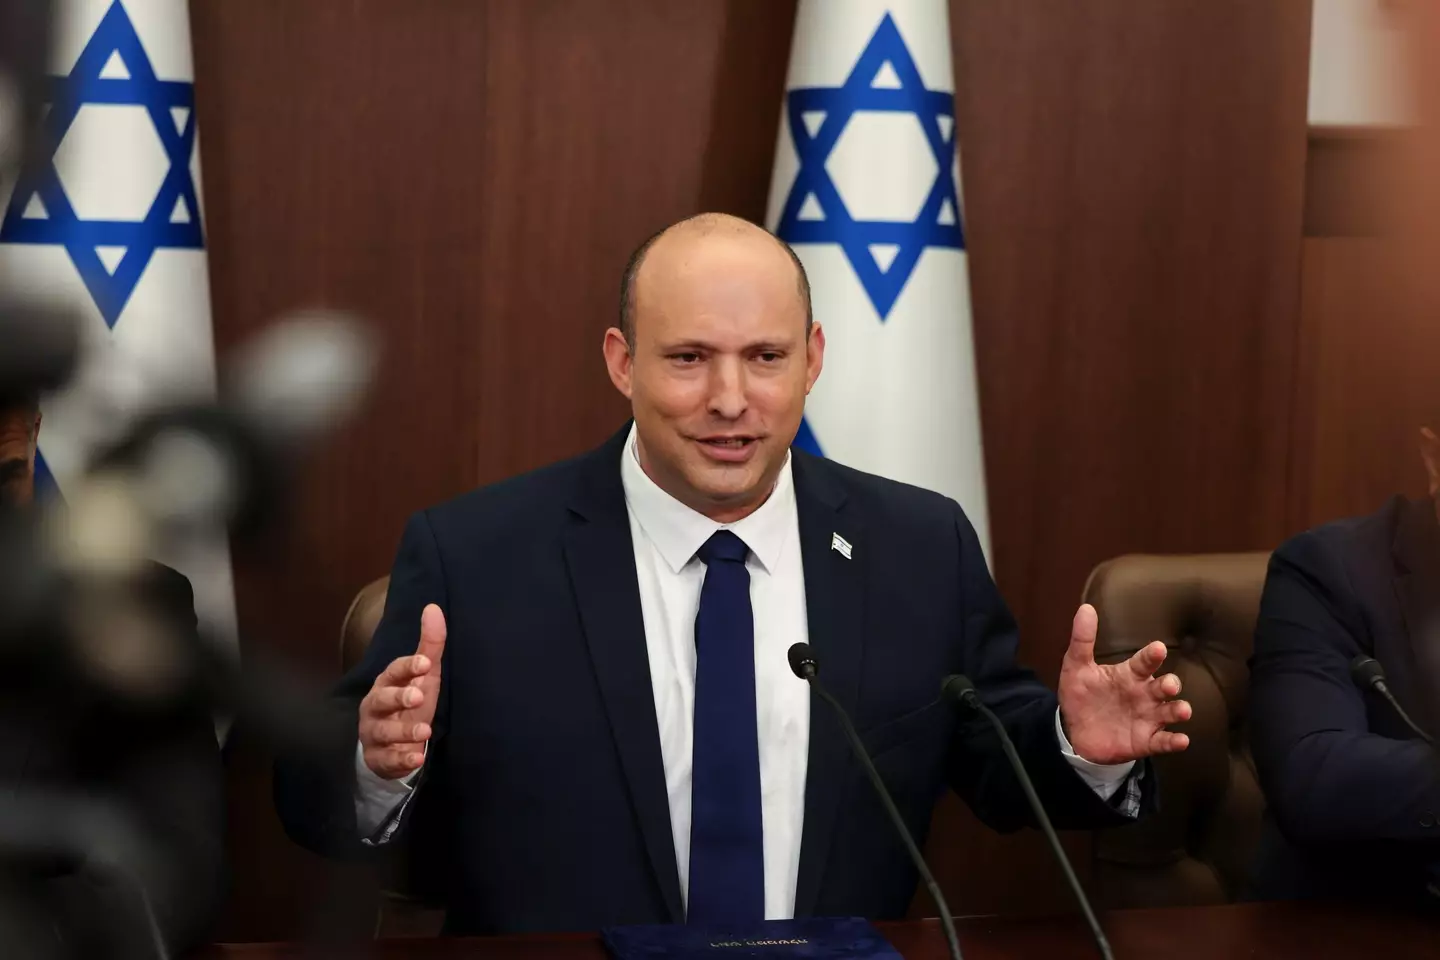 Bennett said he had accepted an apology from Putin.